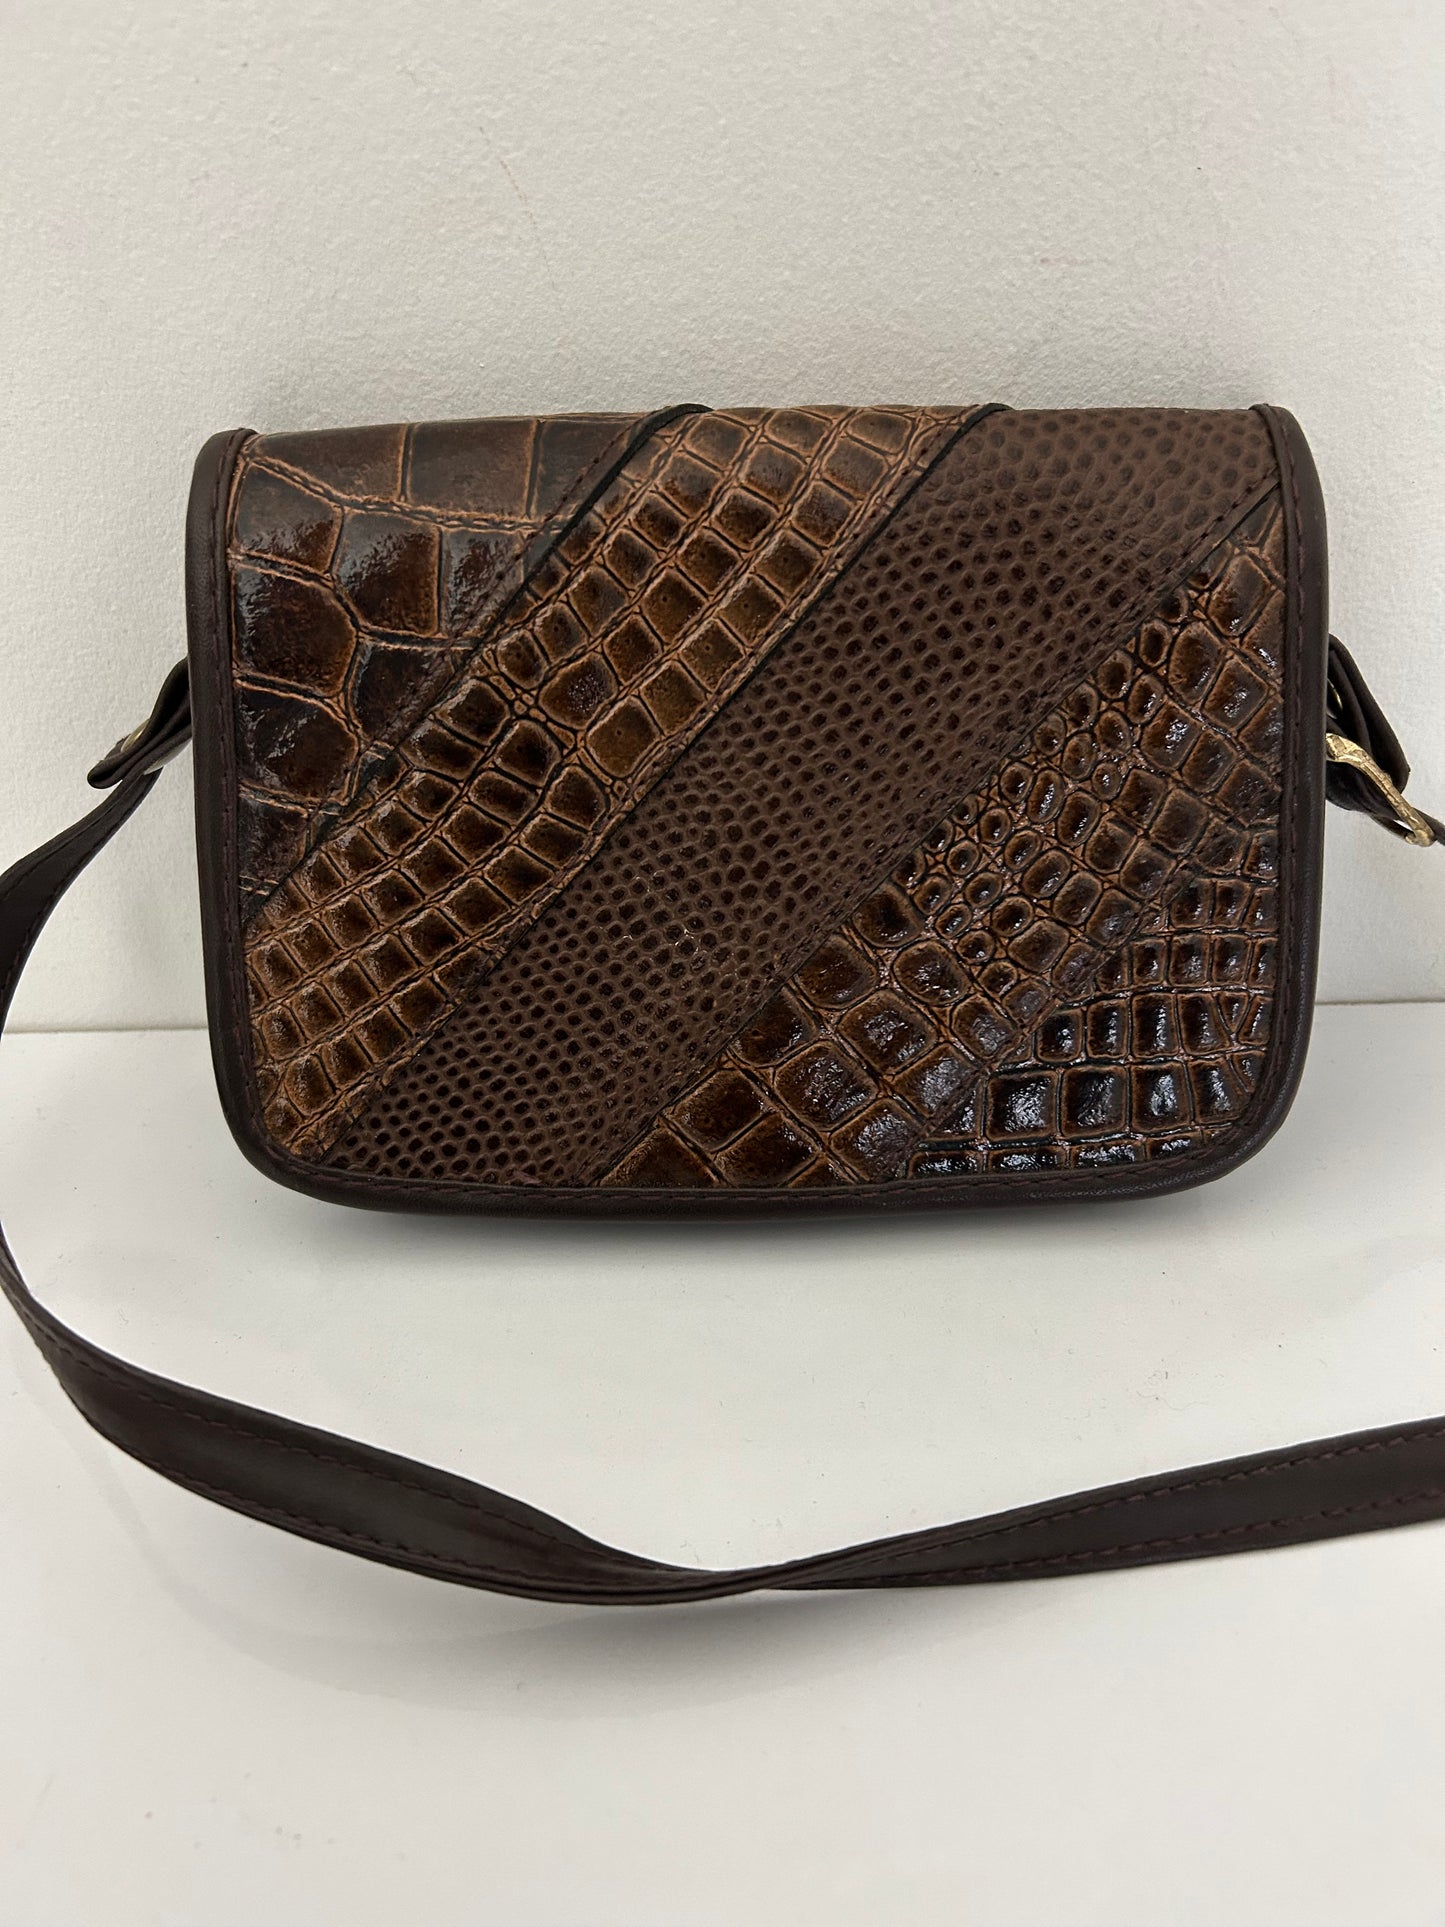 Vintage 1980s Brown Faux Reptile Leather Small Cross Body Handbag